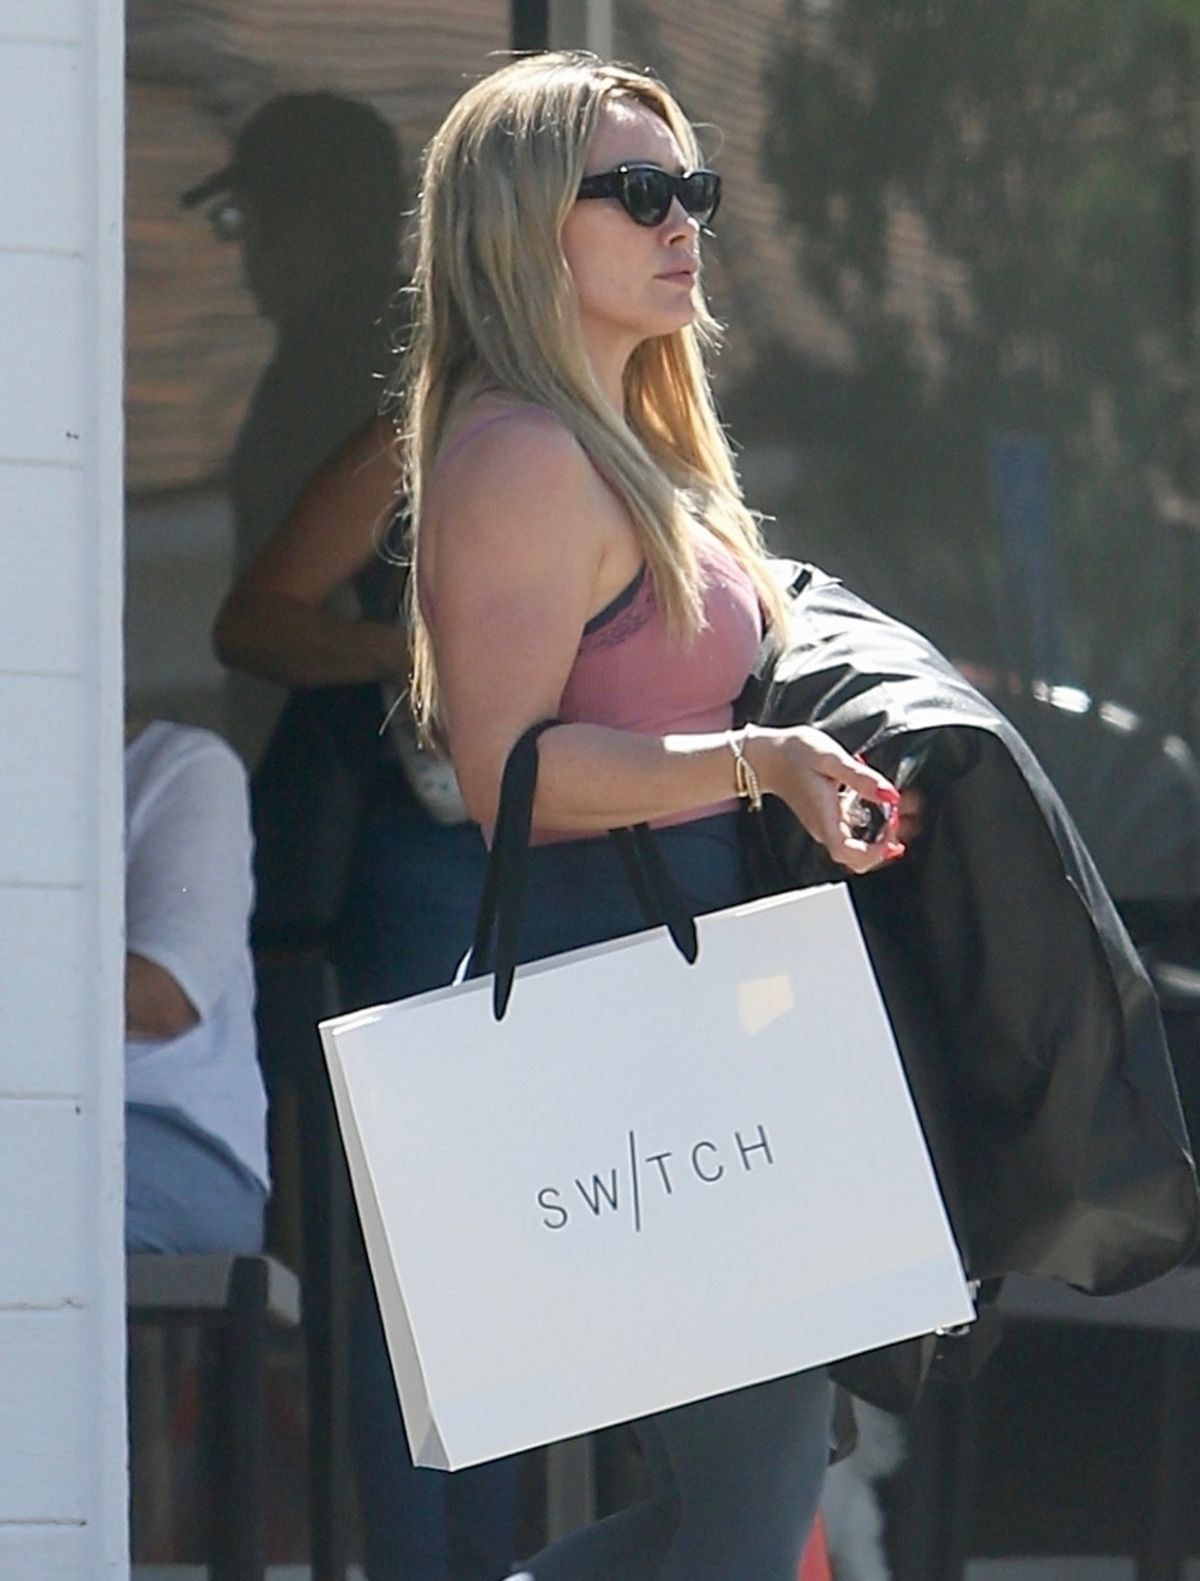 Hilary Duff Out in Santa Monica Calif August 23, 2012 – Star Style